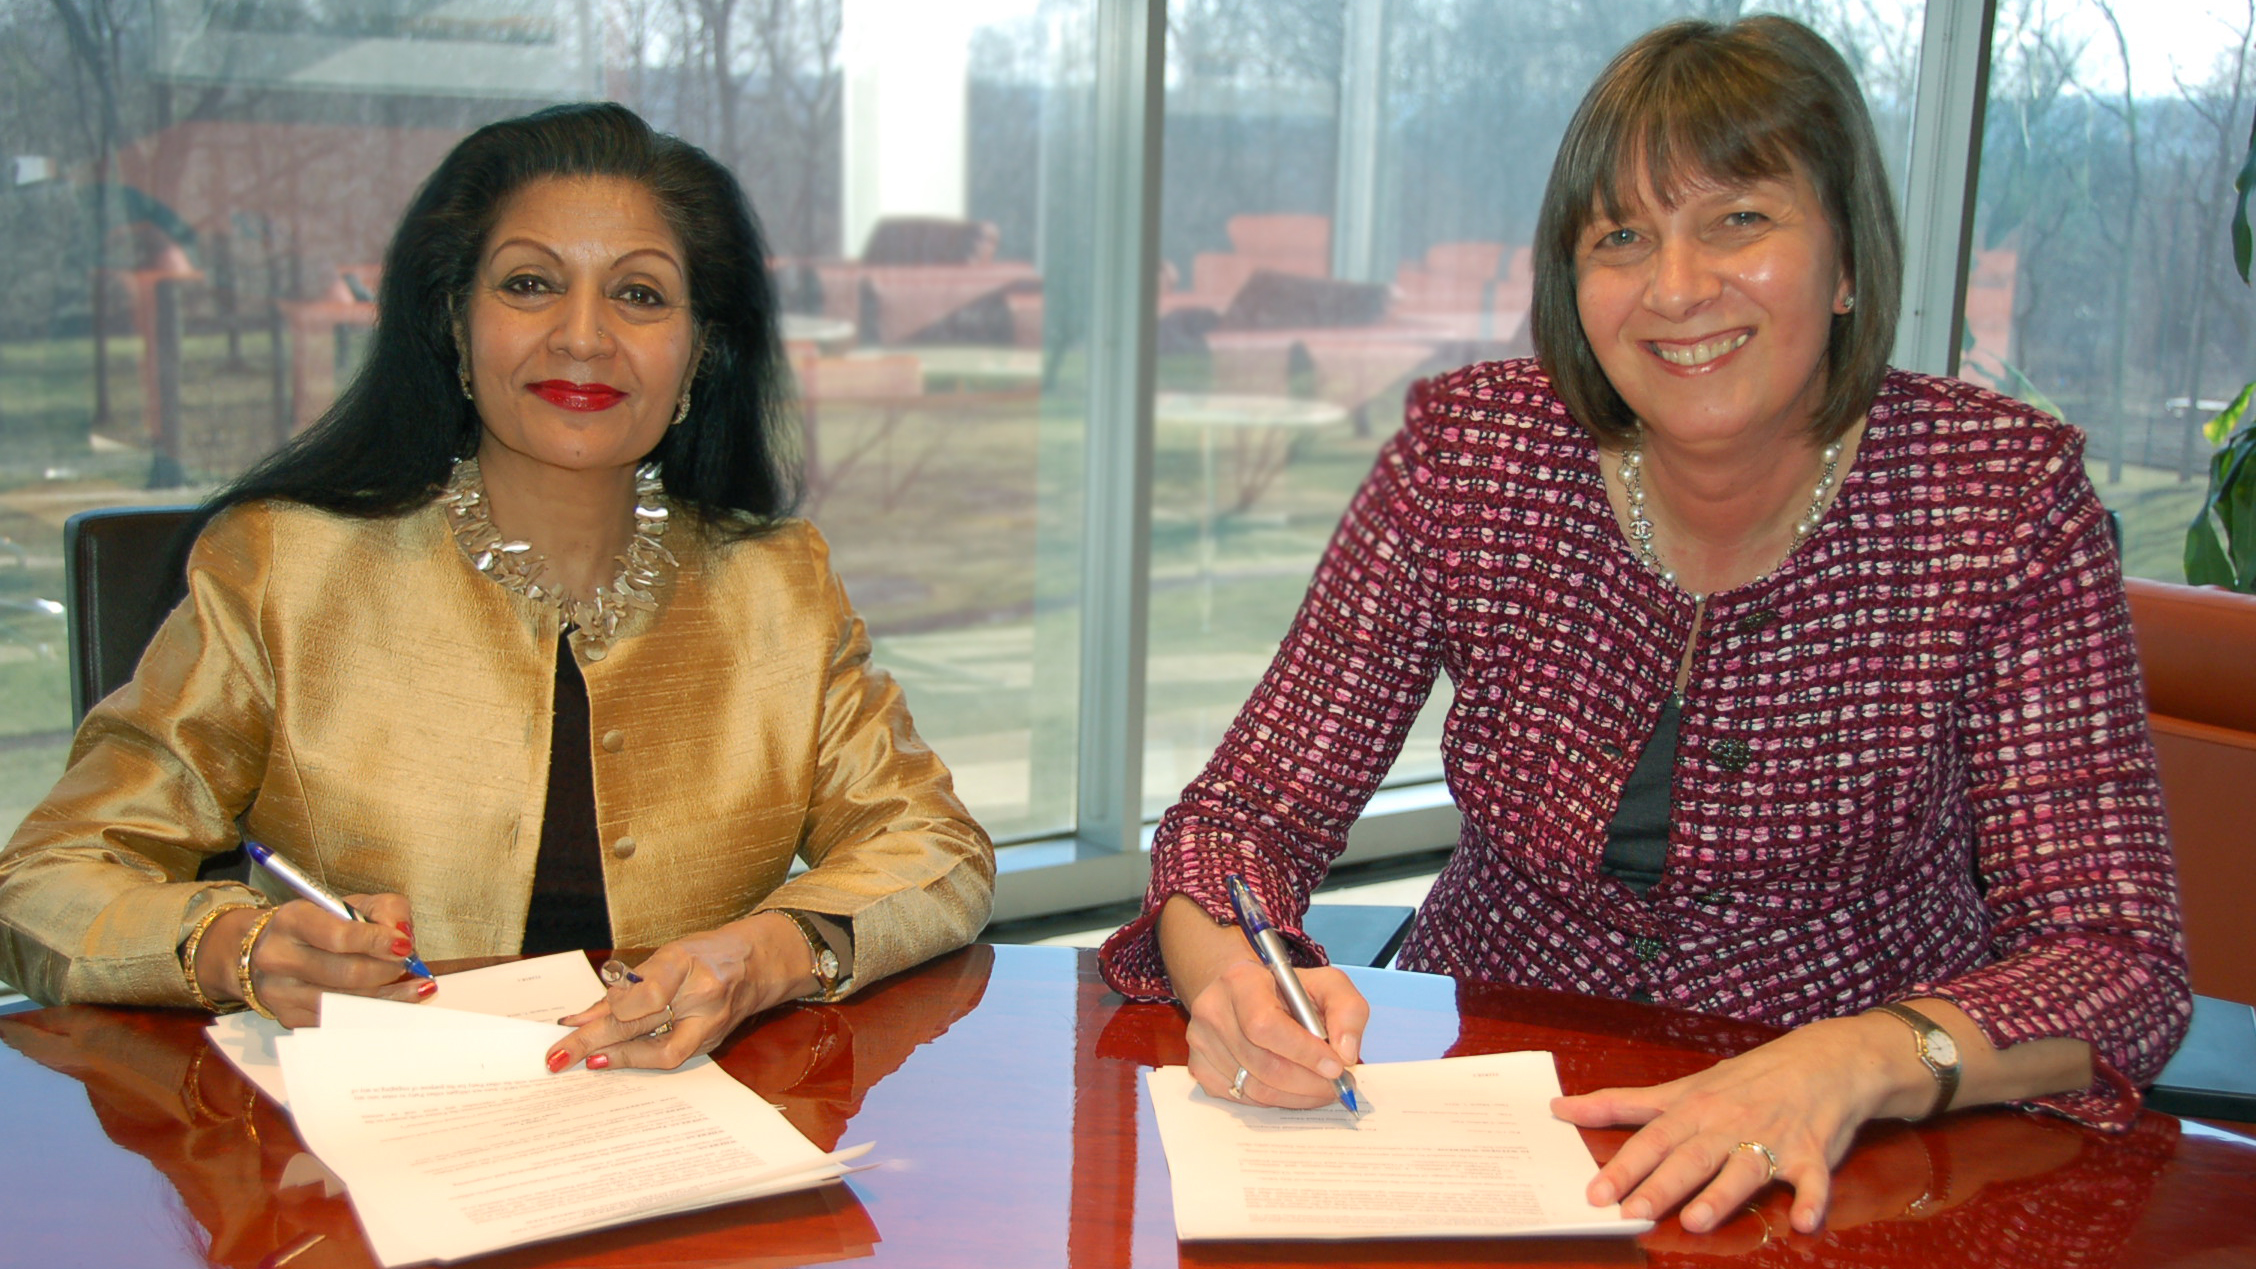 In Purchase NY, MasterCard’s CFO, Martina Hund-Mejean signs a Memorandum of Understanding (MOU), with Lakshmi Puri, United Nations Assistant Secretary-General Deputy Executive Director.